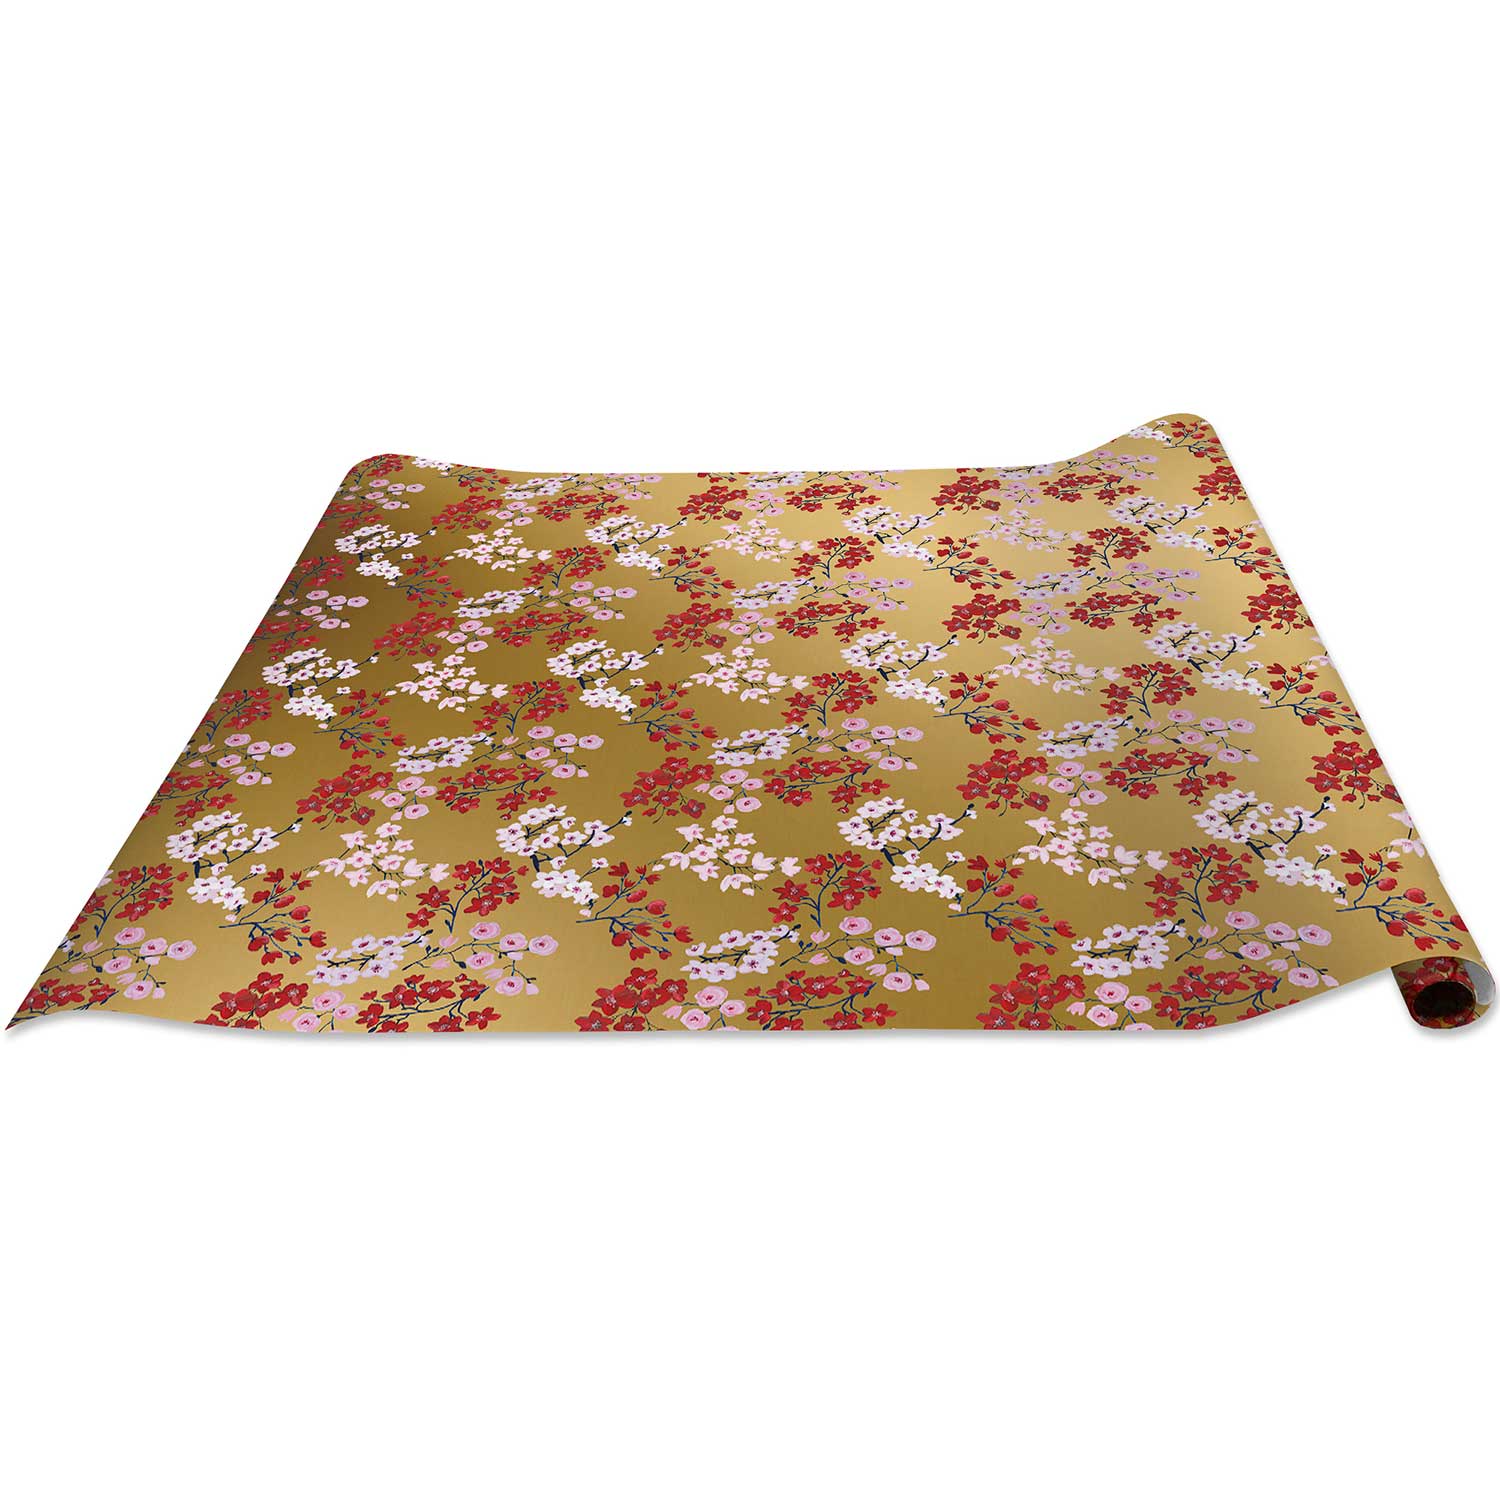 Drifting Blossoms Floral Gift Wrap Full Ream 833 ft x 24 in